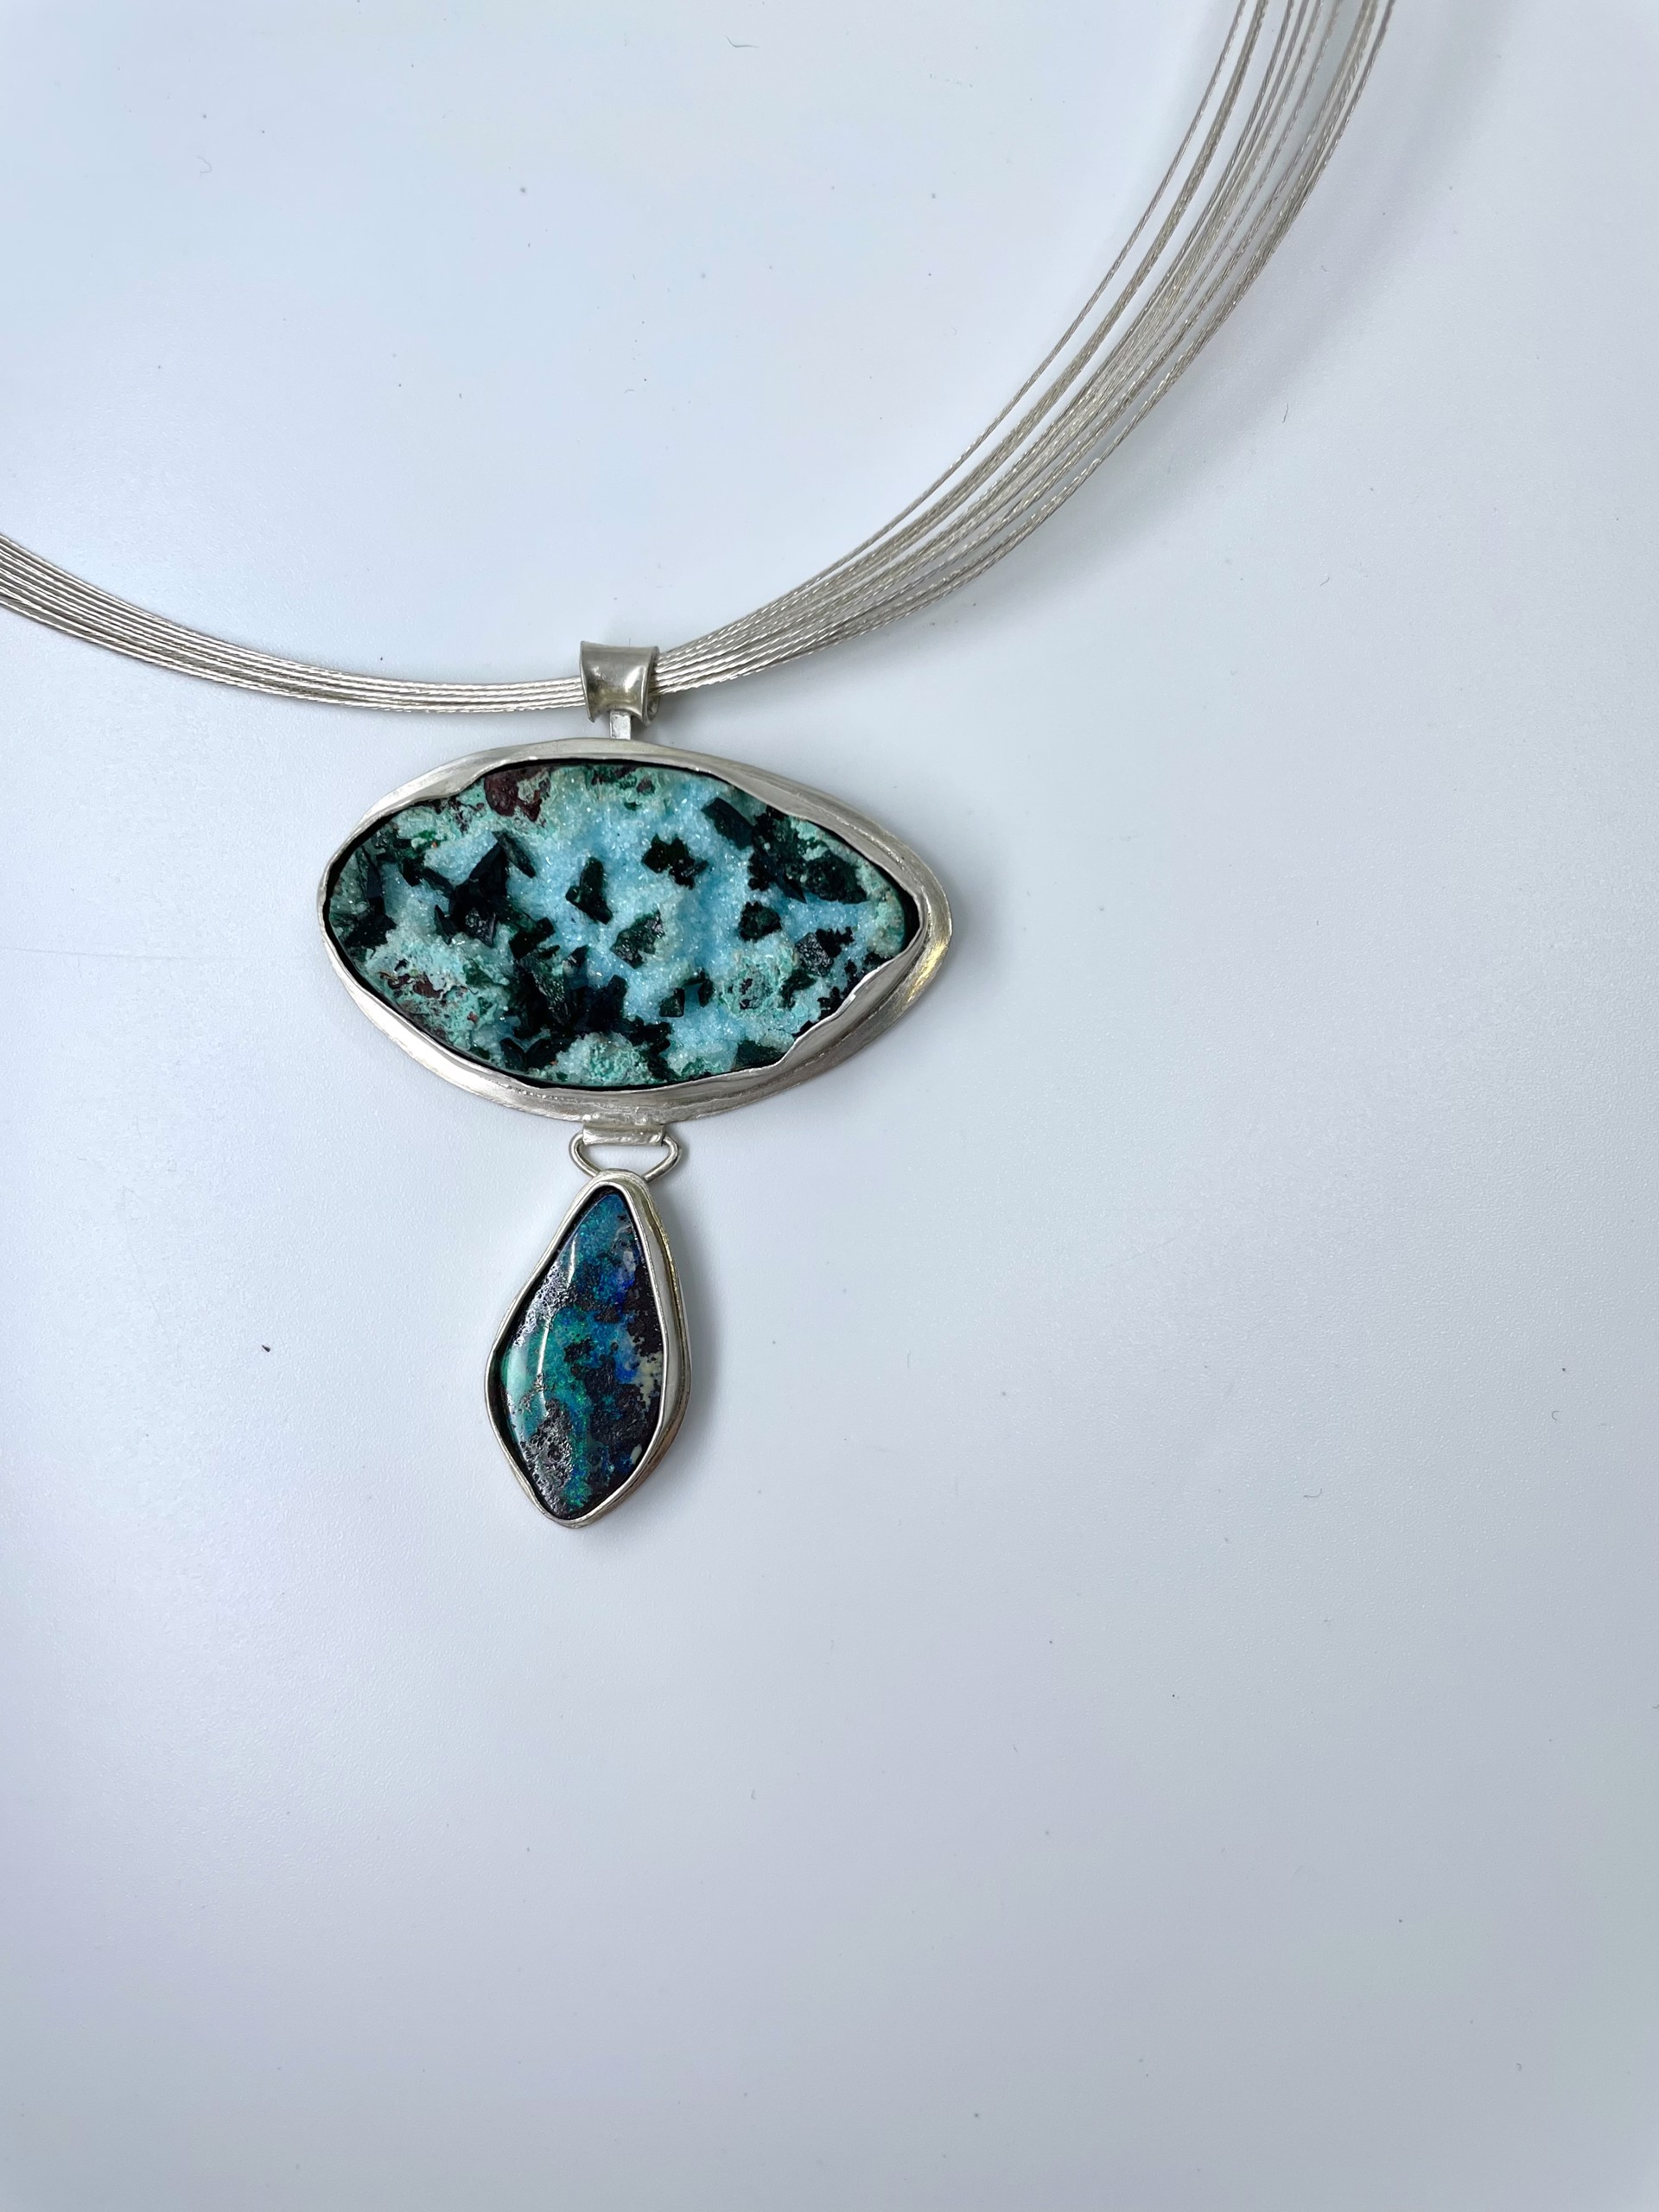 4243 Green Chrysocolla Drusy with Boulder Opal Necklace by Suzanne Brown